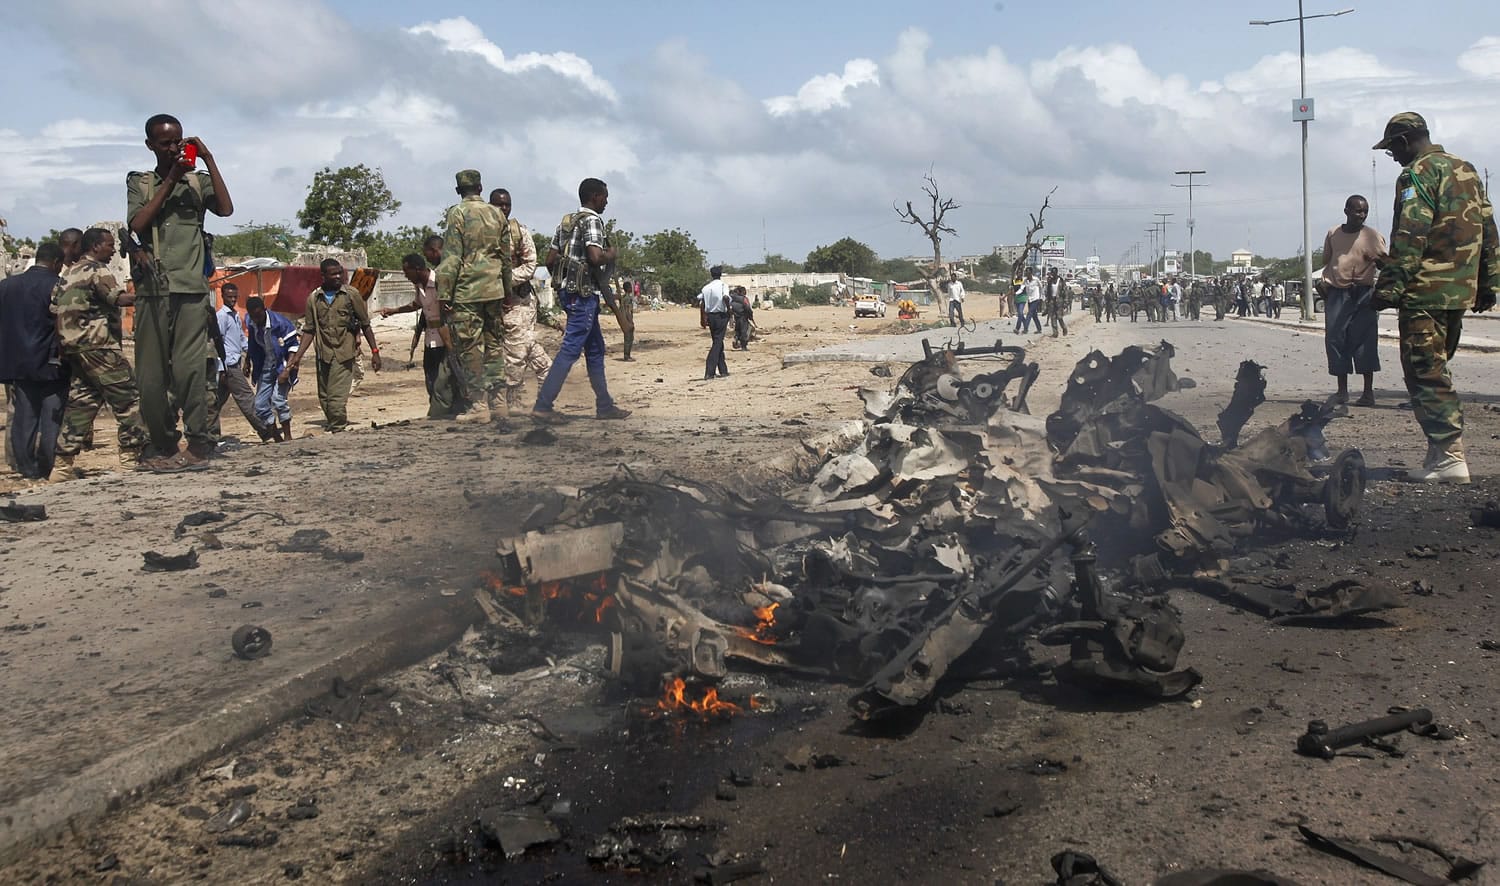 Somali soldiers stand near the wreckage at the scene of a suicide car bomb attack which targeted a convoy of foreign officials, in Mogadishu, Somalia, on Wednesday.